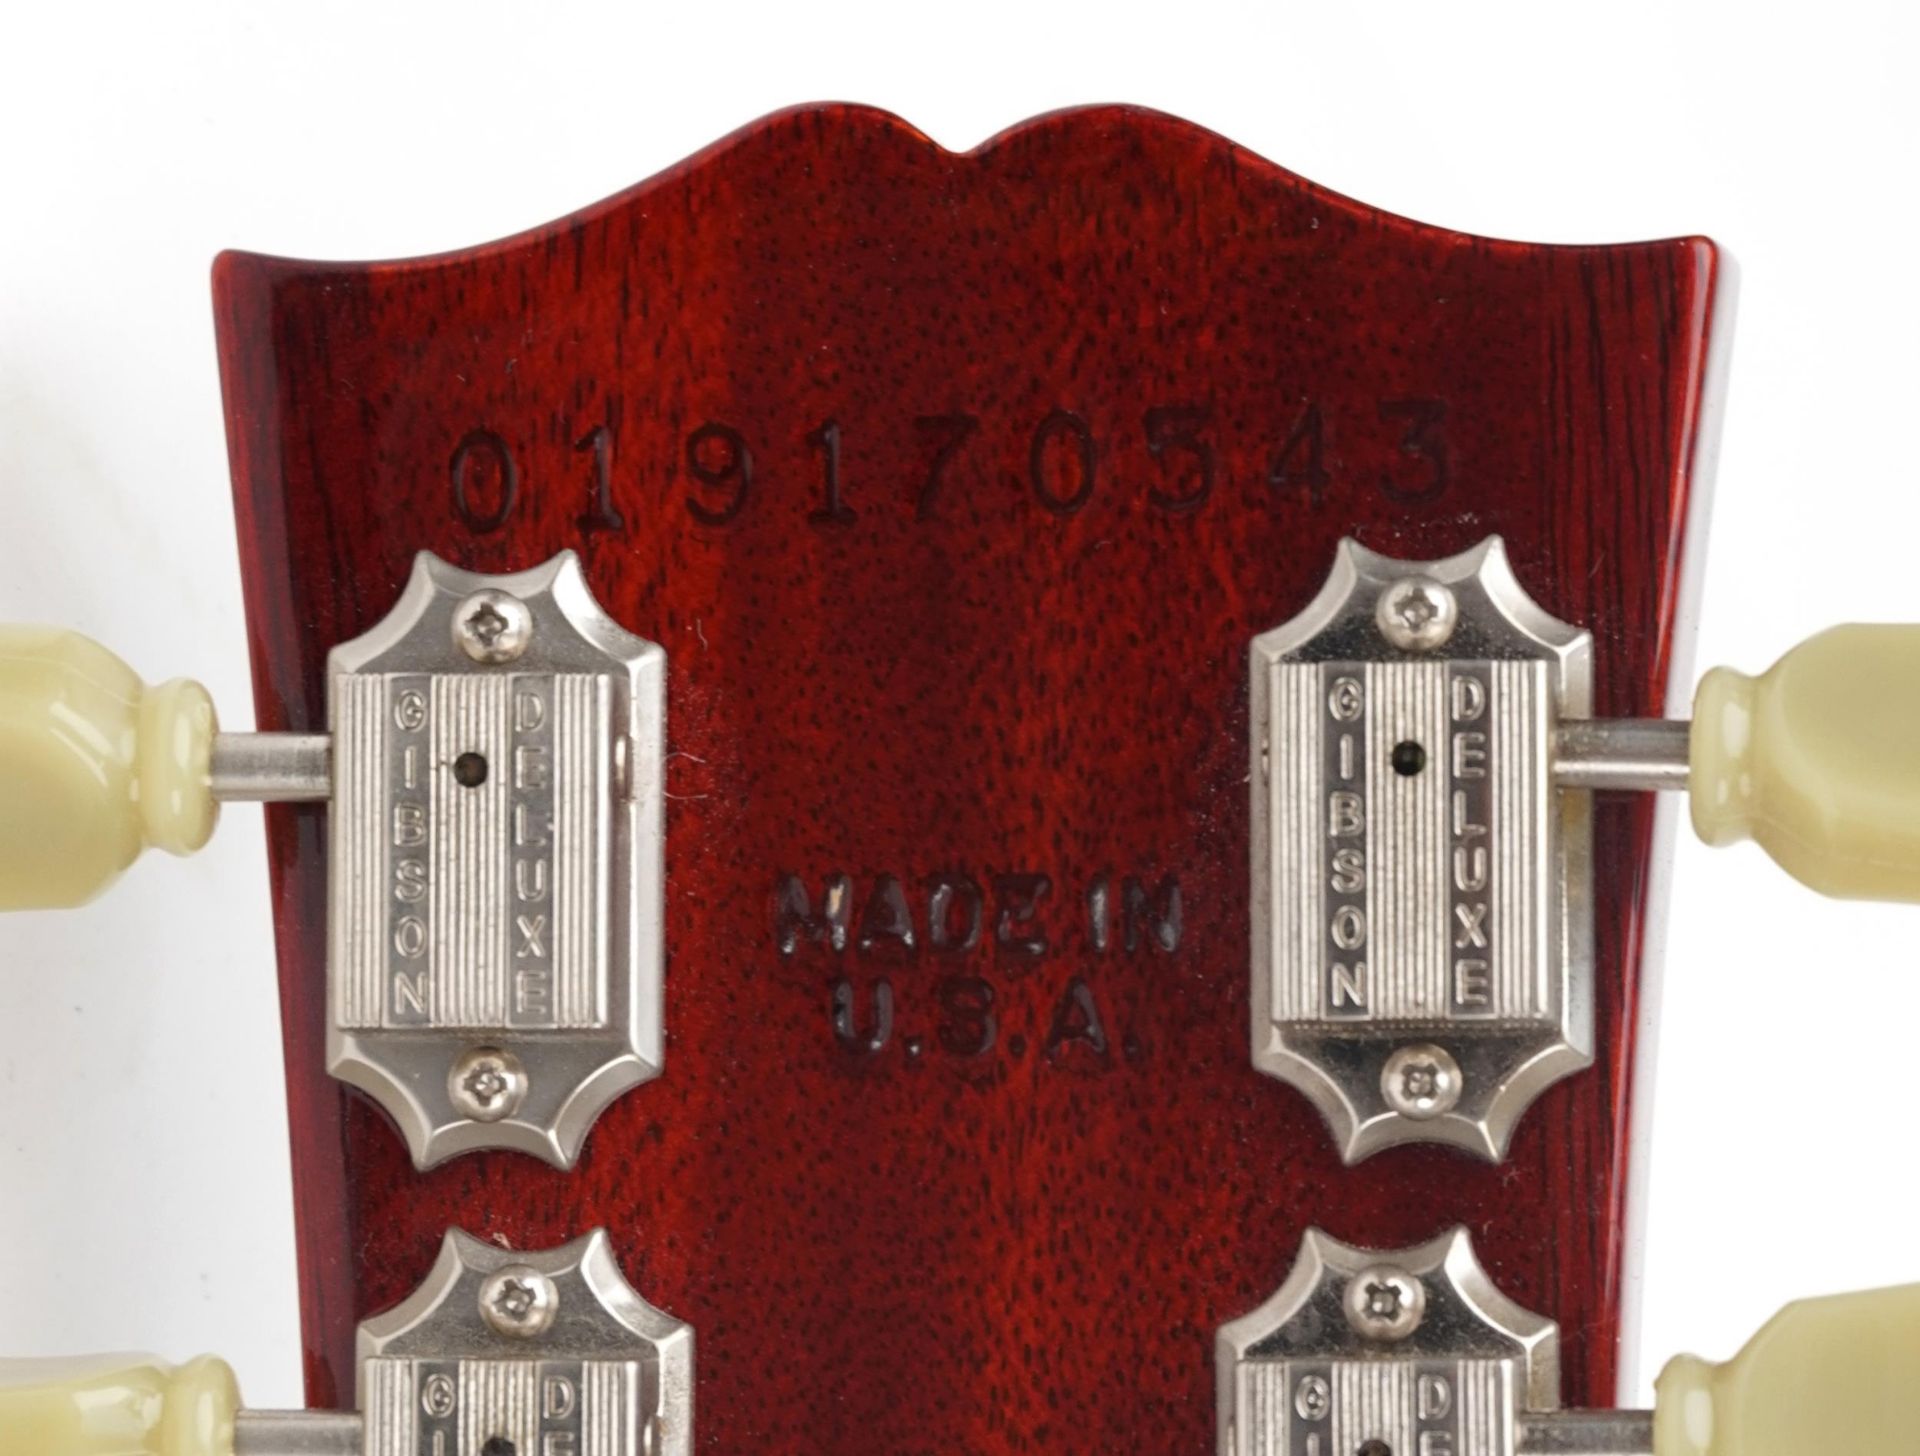 Gibson Classic Les Paul electric guitar with mother of pearl inlay housed in a Gibson protective - Image 4 of 5